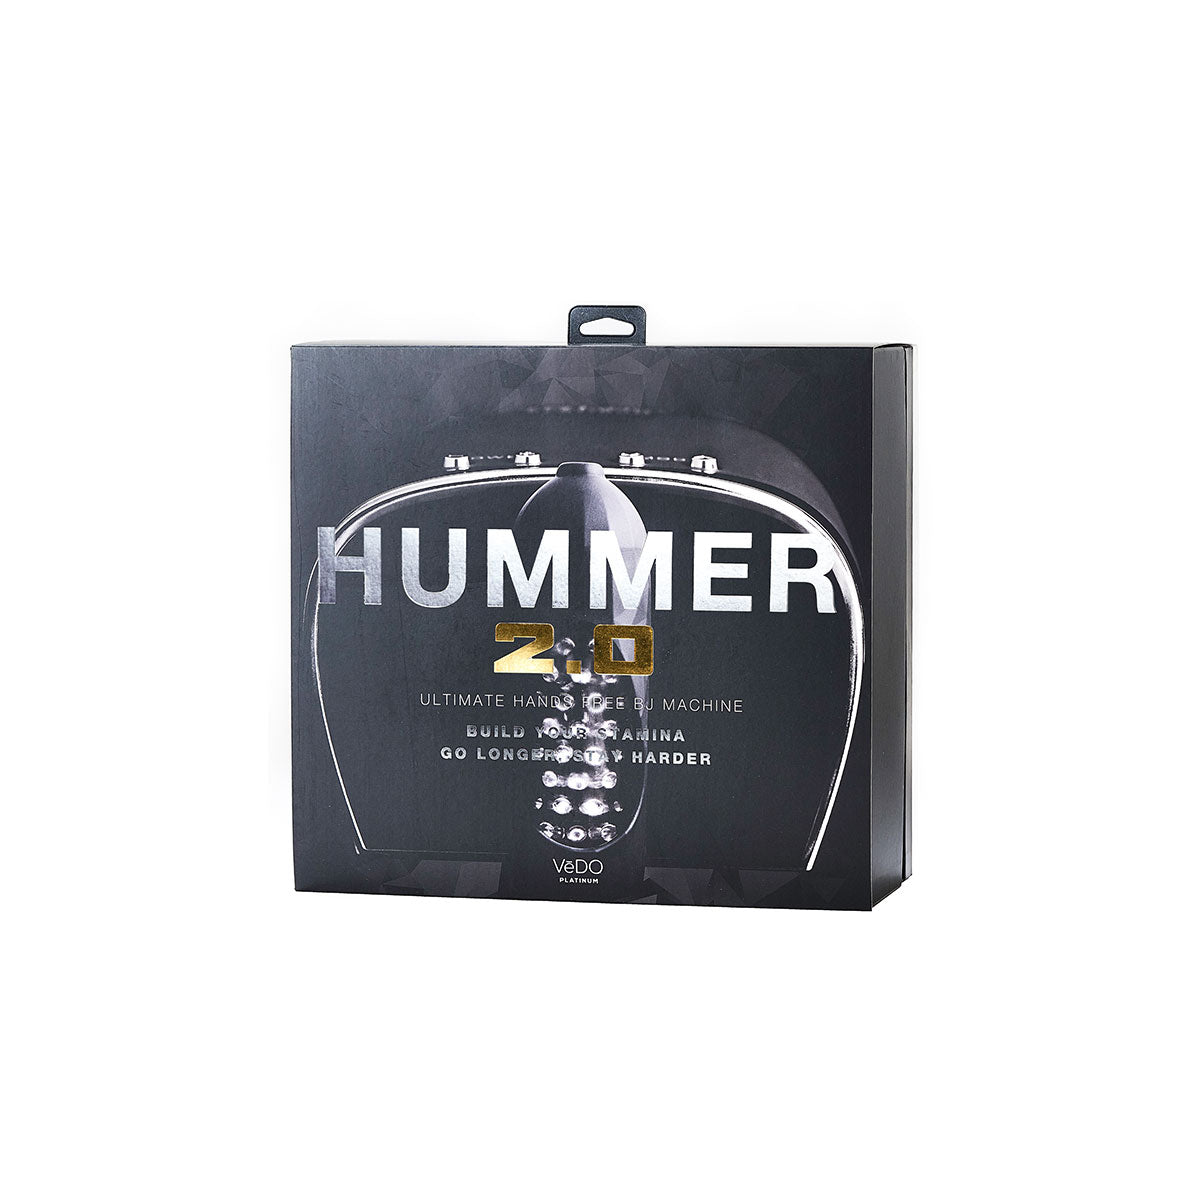 VeDO Hummer 2.0  The Ultimate BJ Machine Intimates Adult Boutique